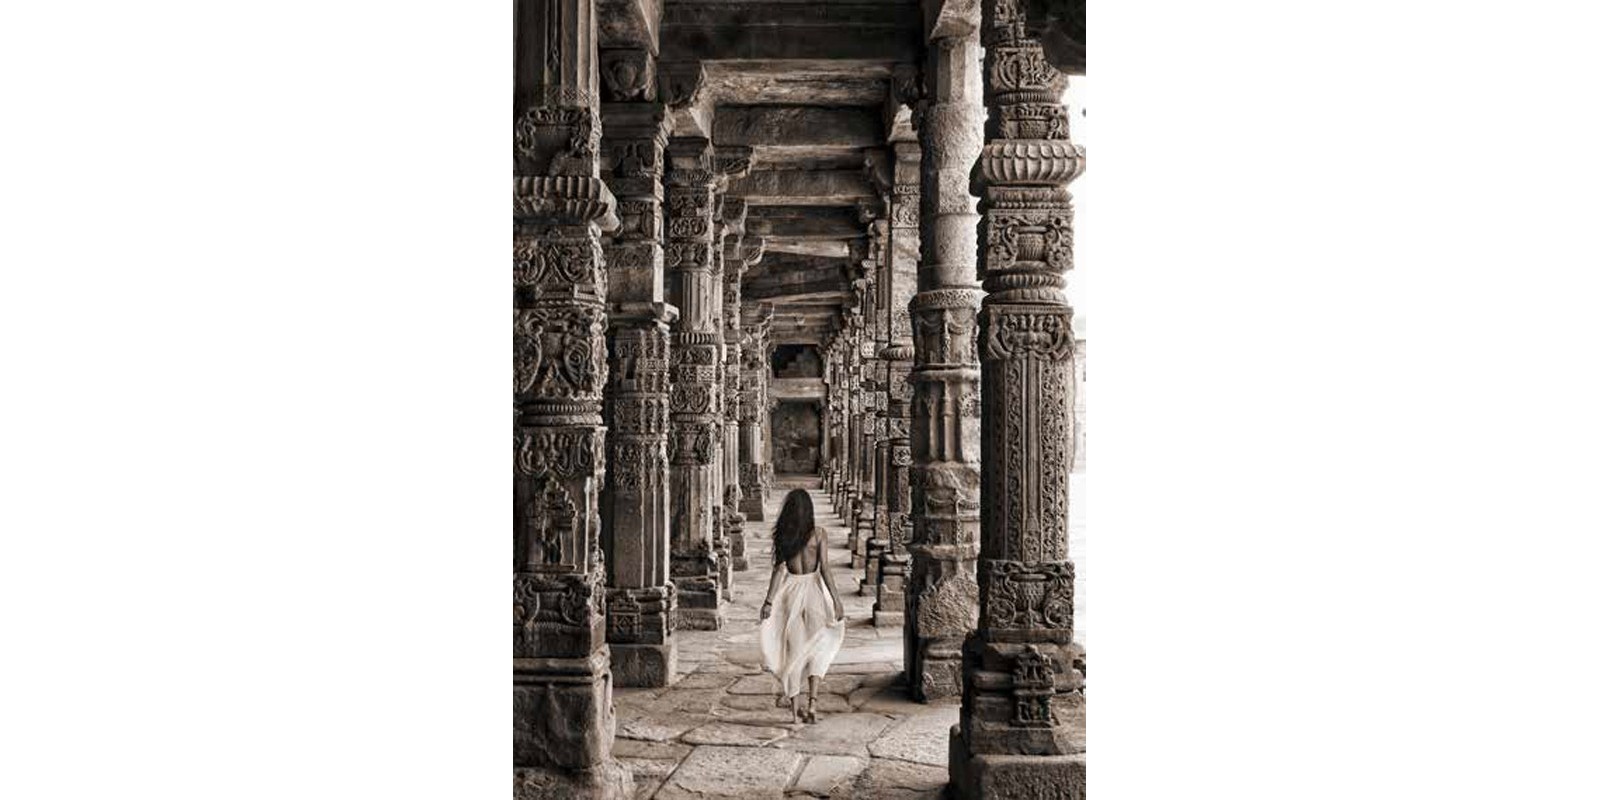 Marc Moreau - At the Temple, India (BW)